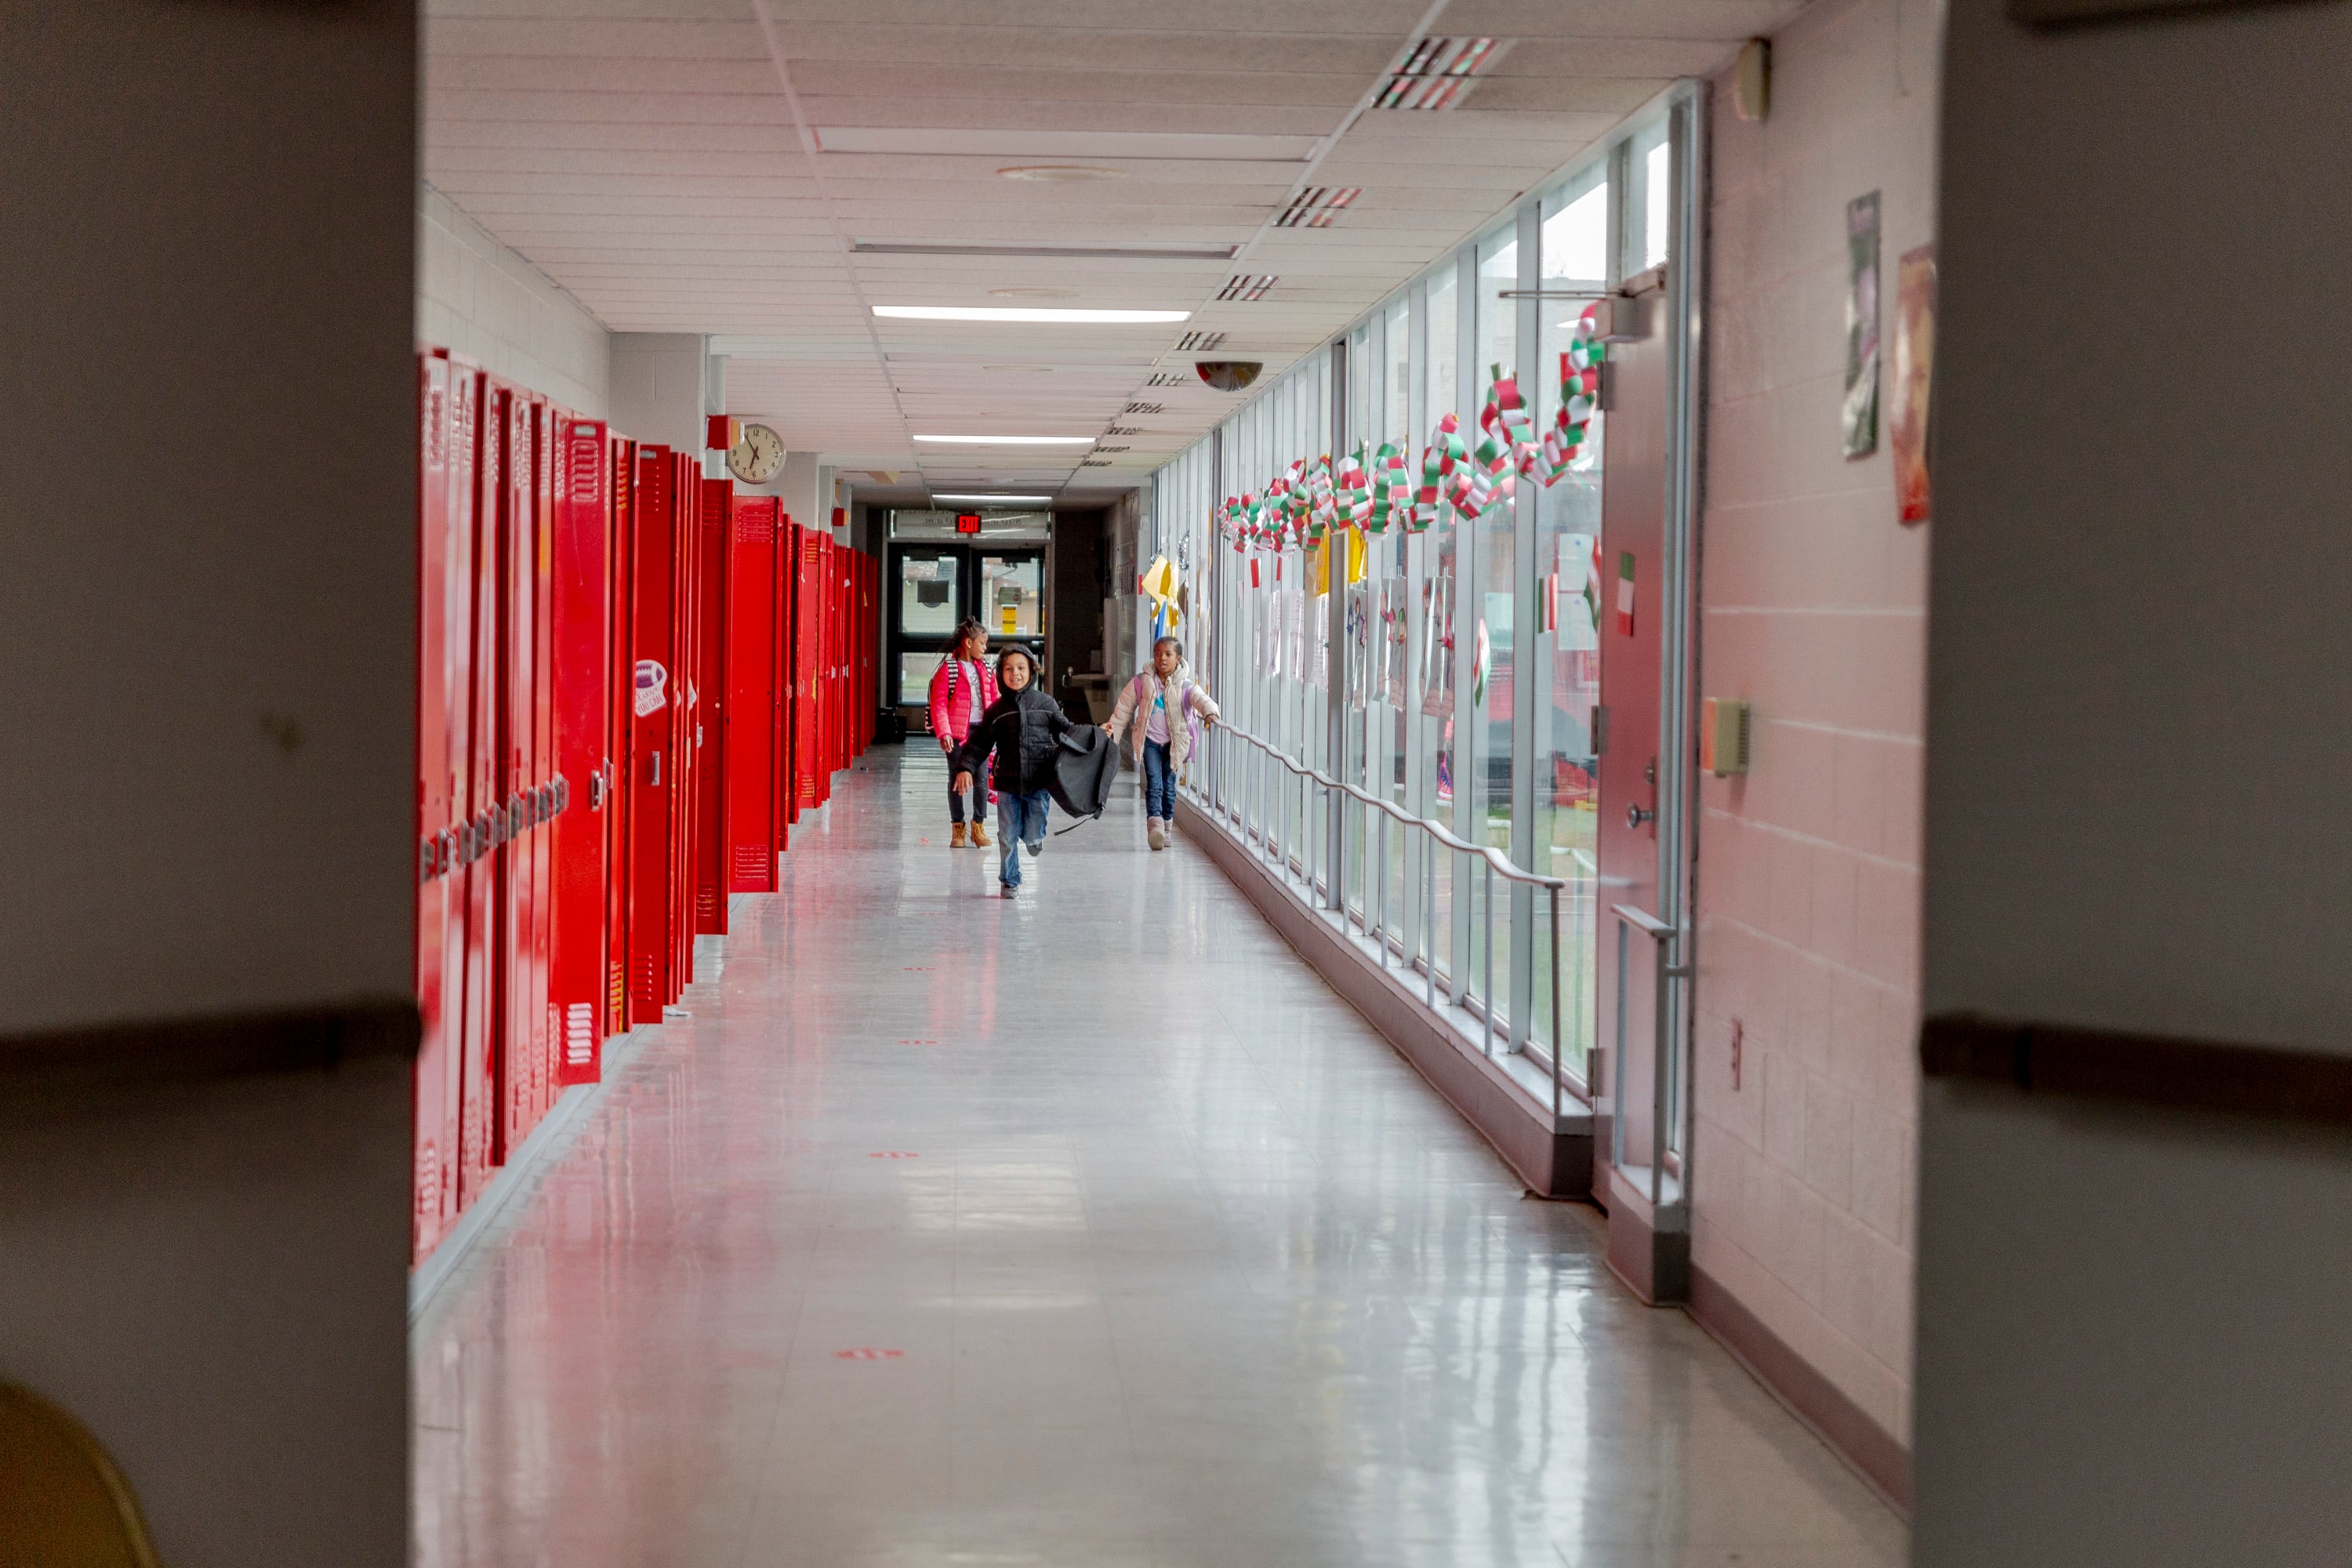 A view down a school hallway lined by red school lockers. The hallway is mostly empty, but a few students are visible in the distance.